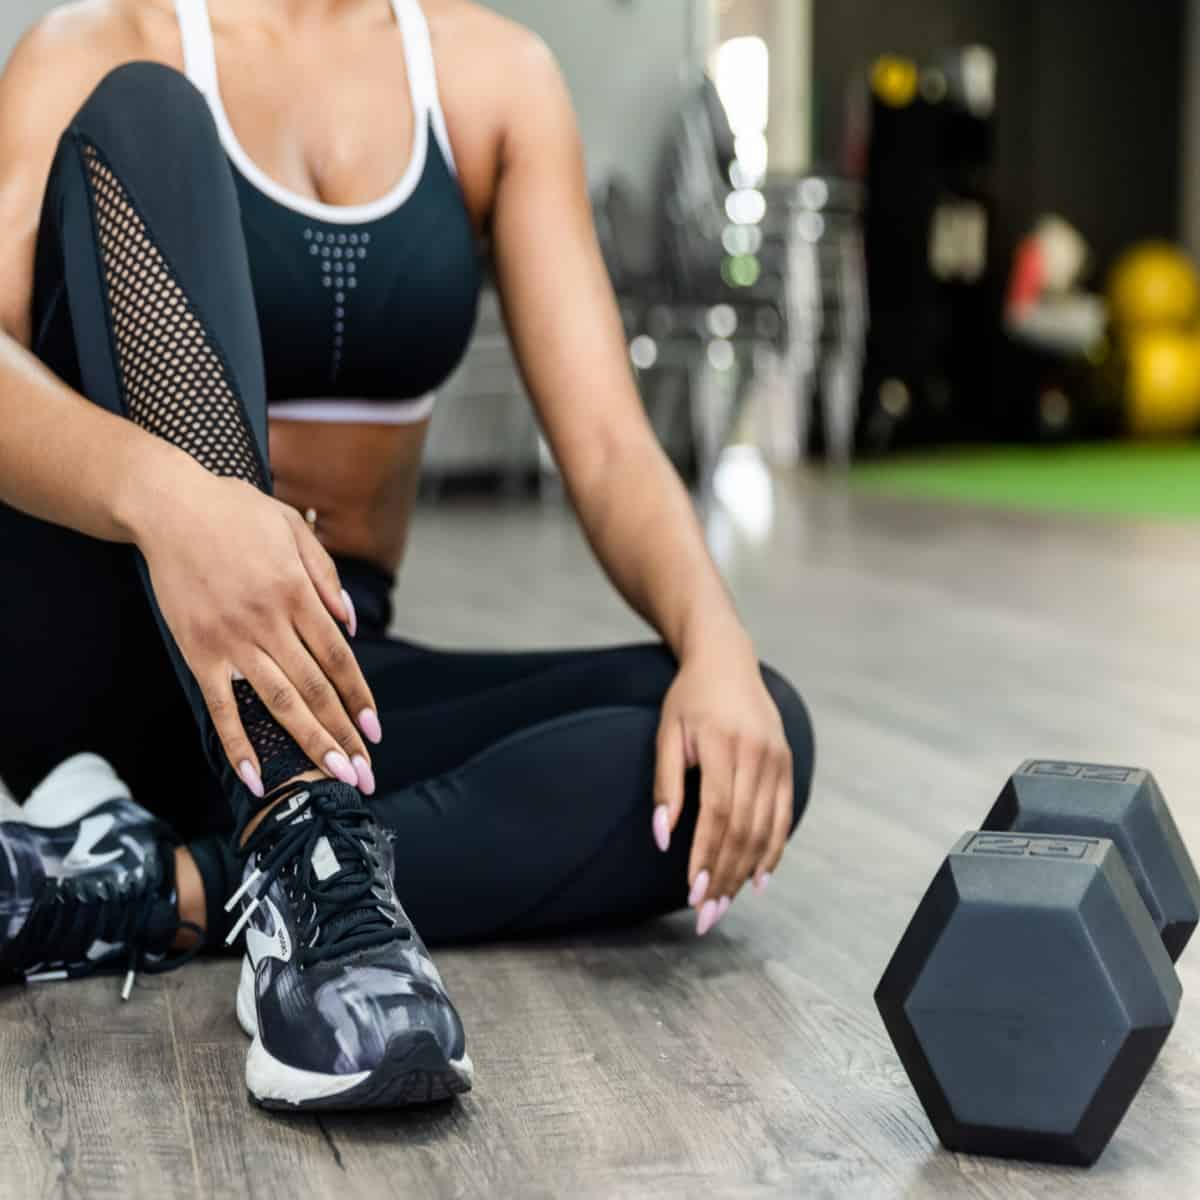 A woman sitting on the floor in a gym with dumbbells.